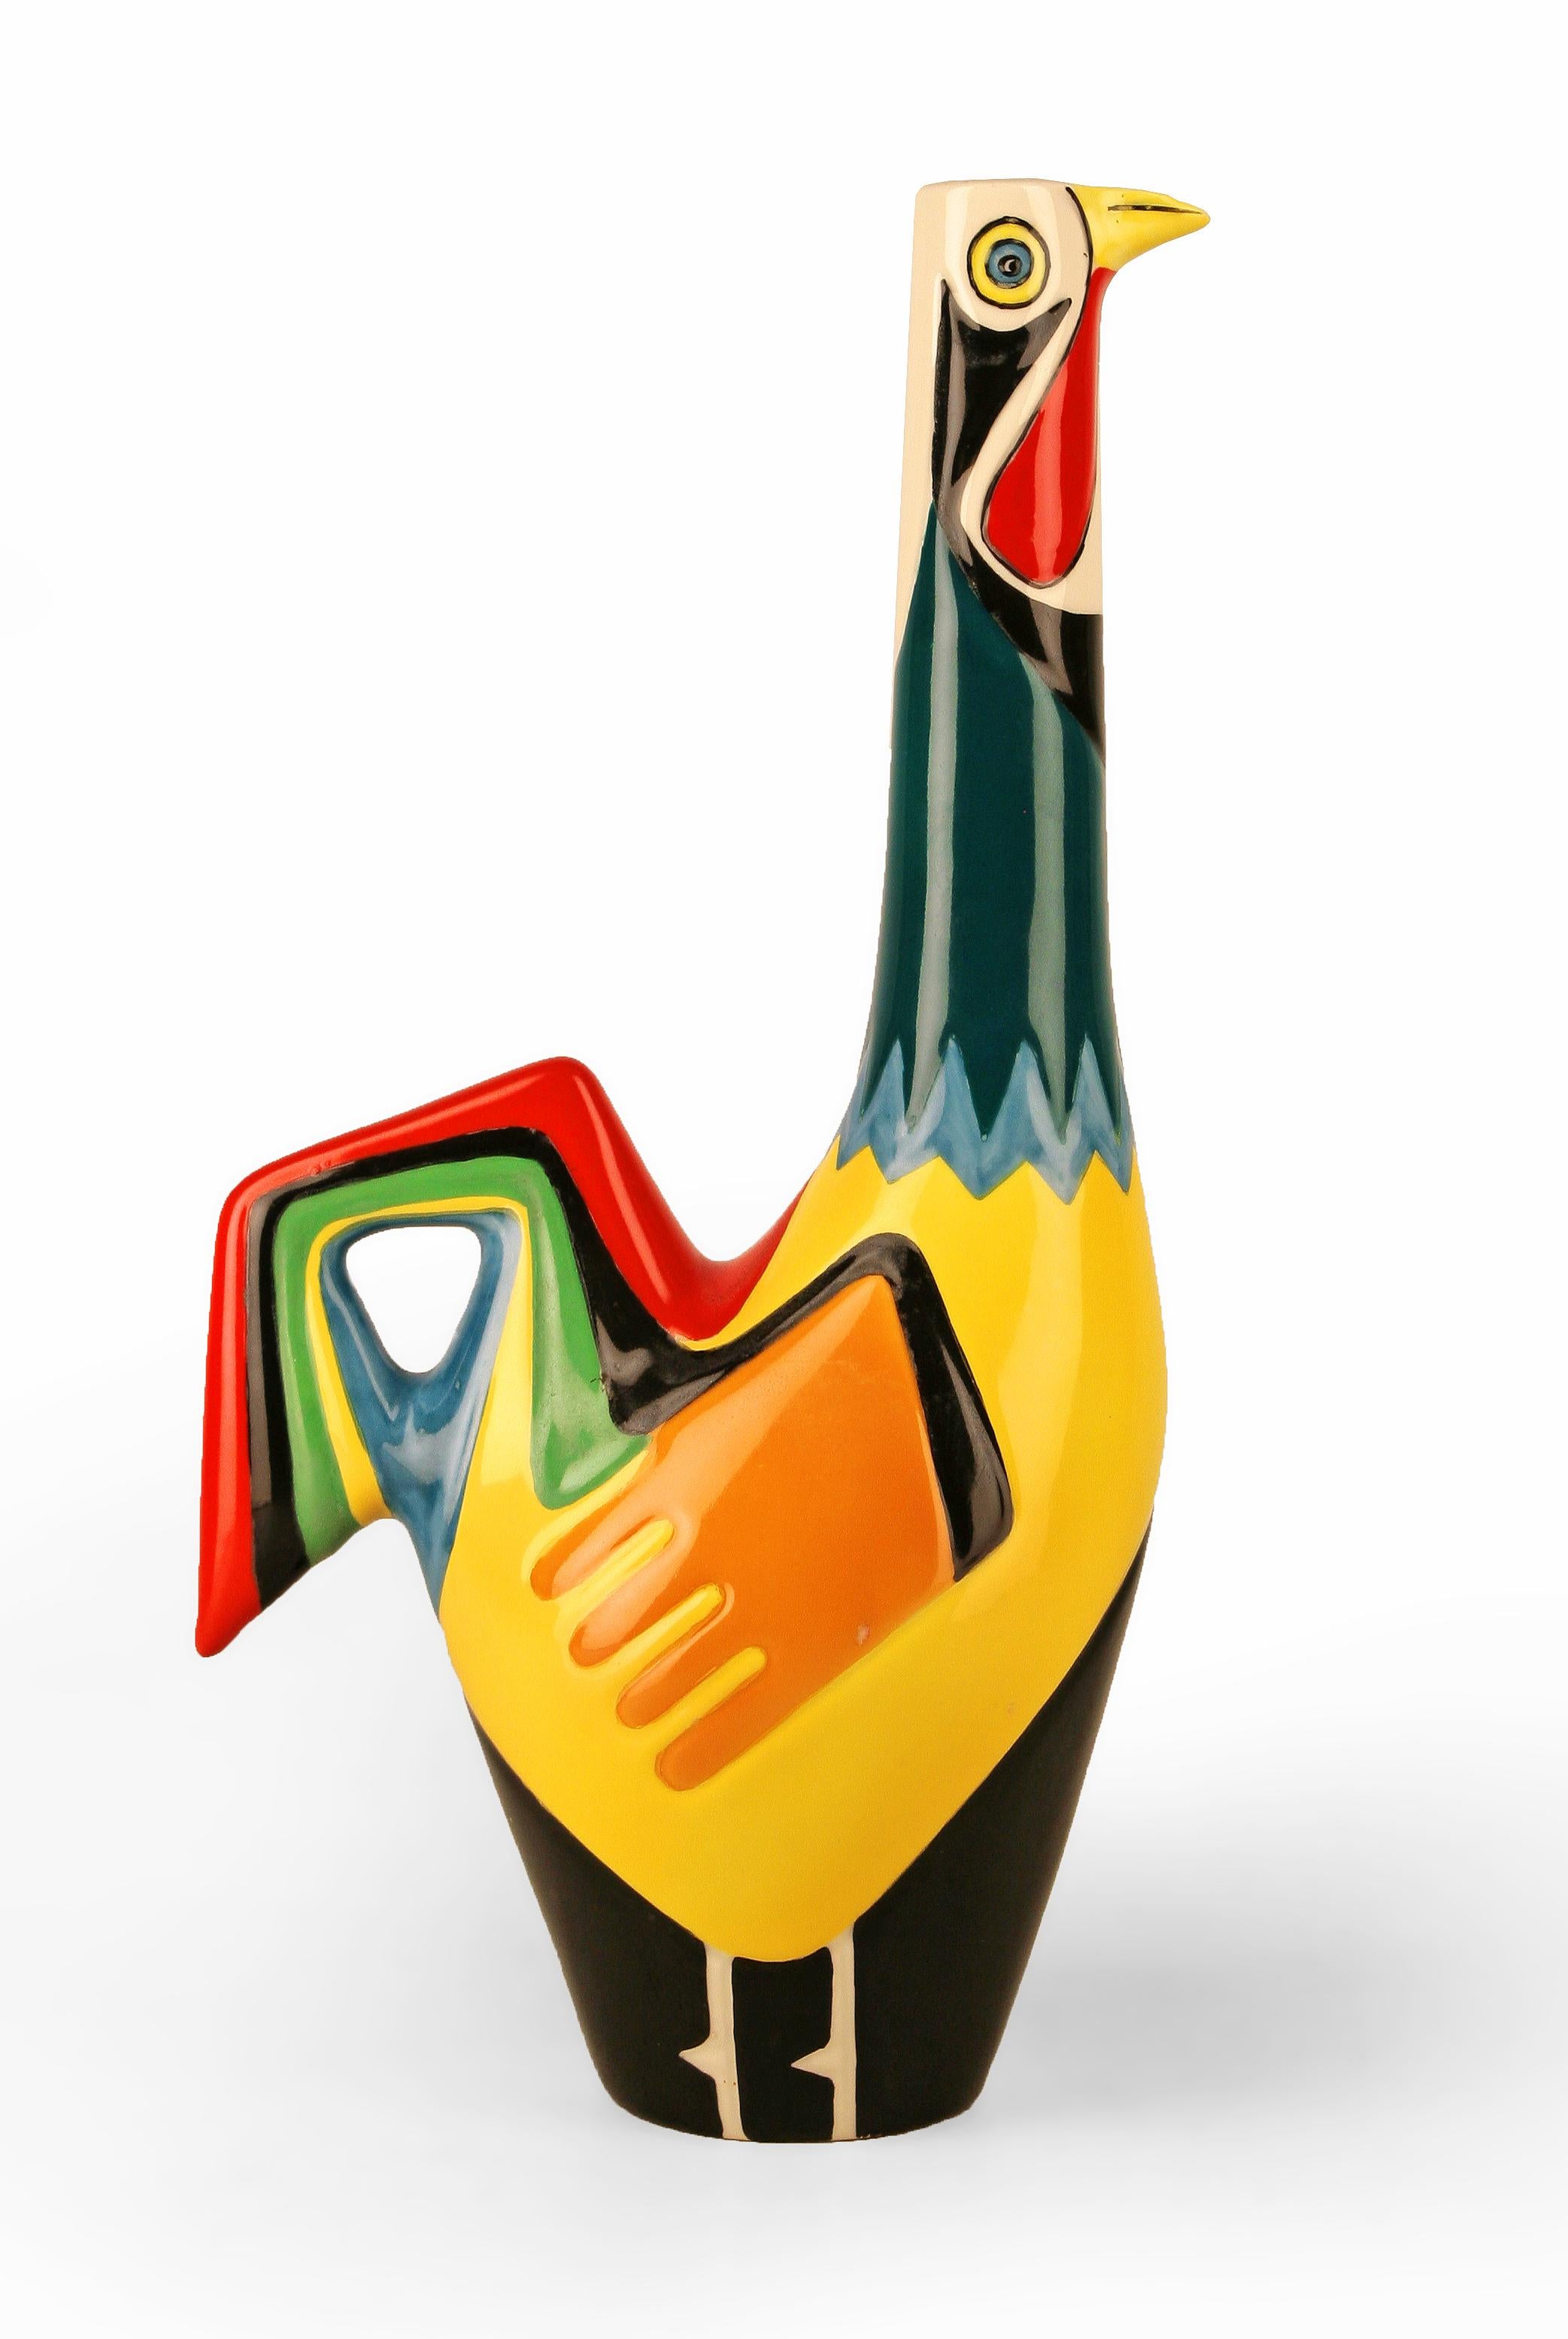 Polished Portuguese Colorful Enameled Ceramic Rooster Decanter/Pitcher by Real Vinícola